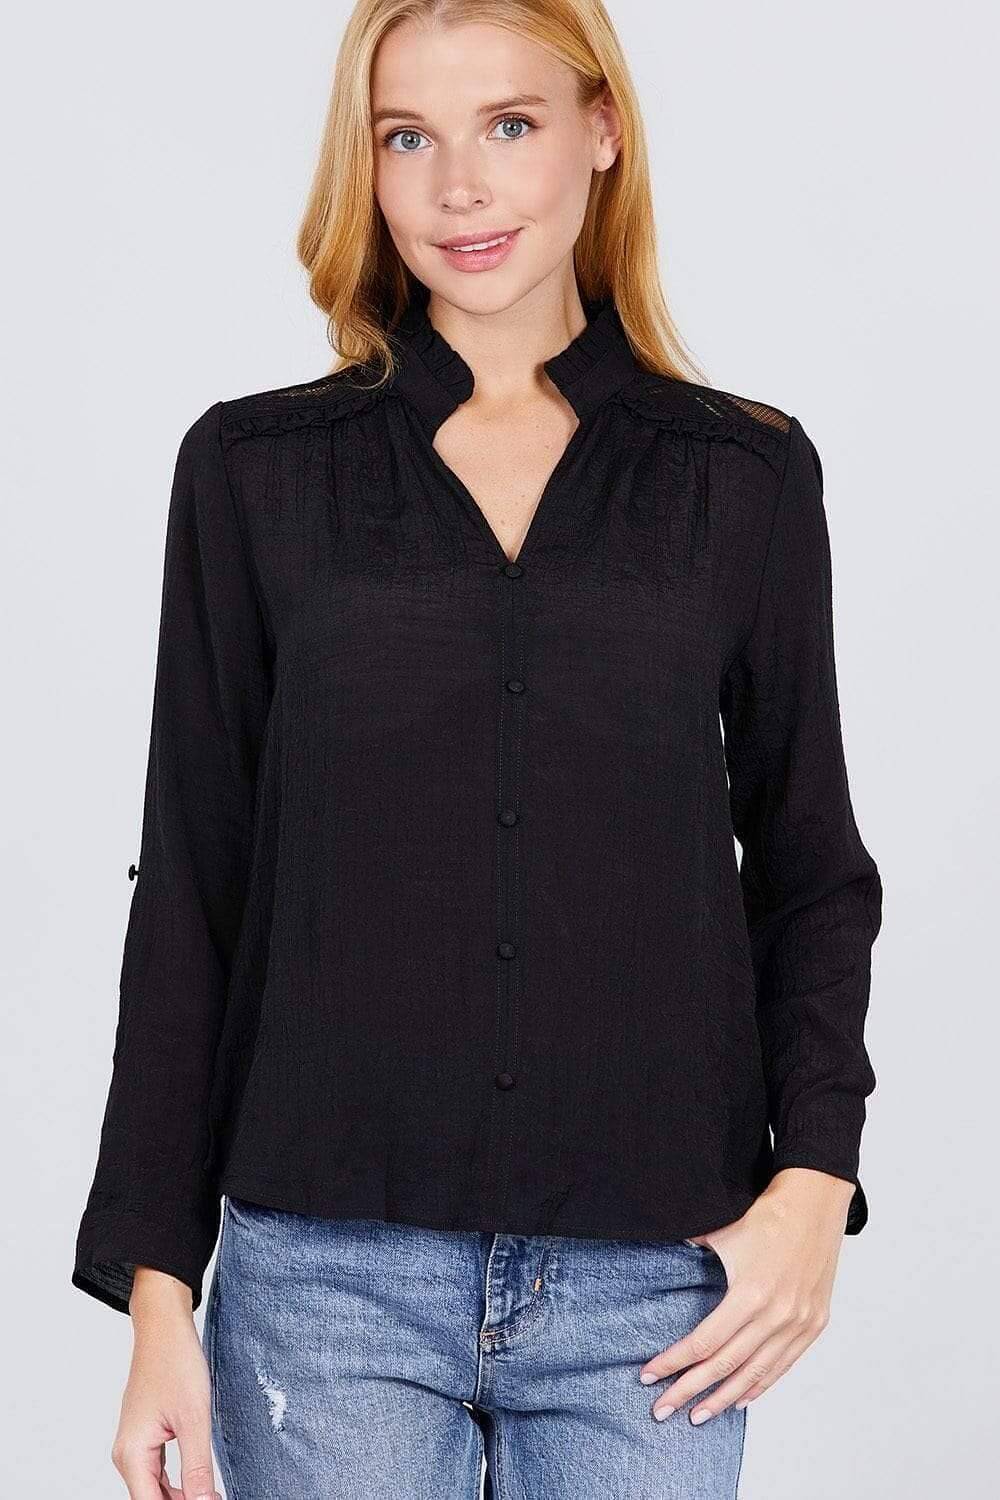 Black Long Sleeve V-Neck Button Down Top - Shopping Therapy M Top